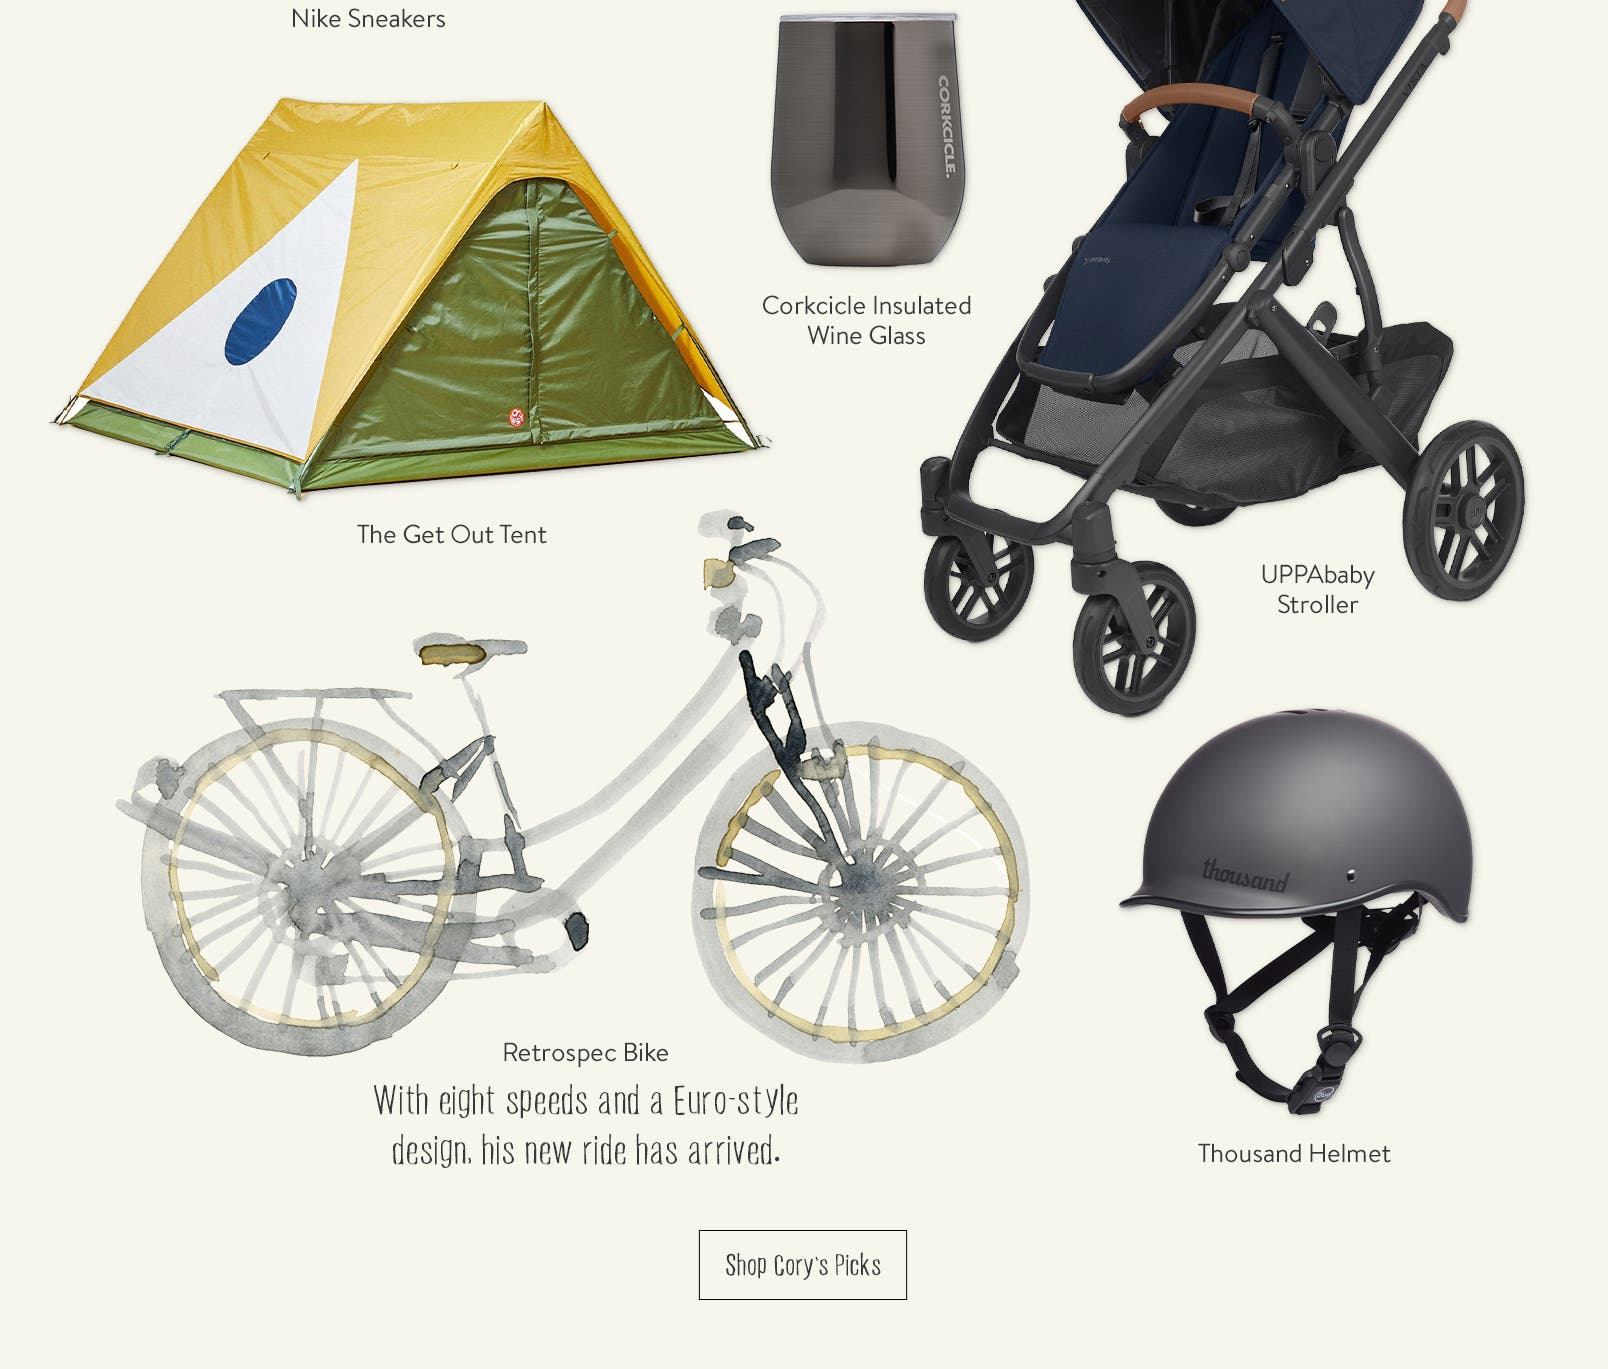 Father's Day gift picks, including outdoor gear, shoes and a stroller.